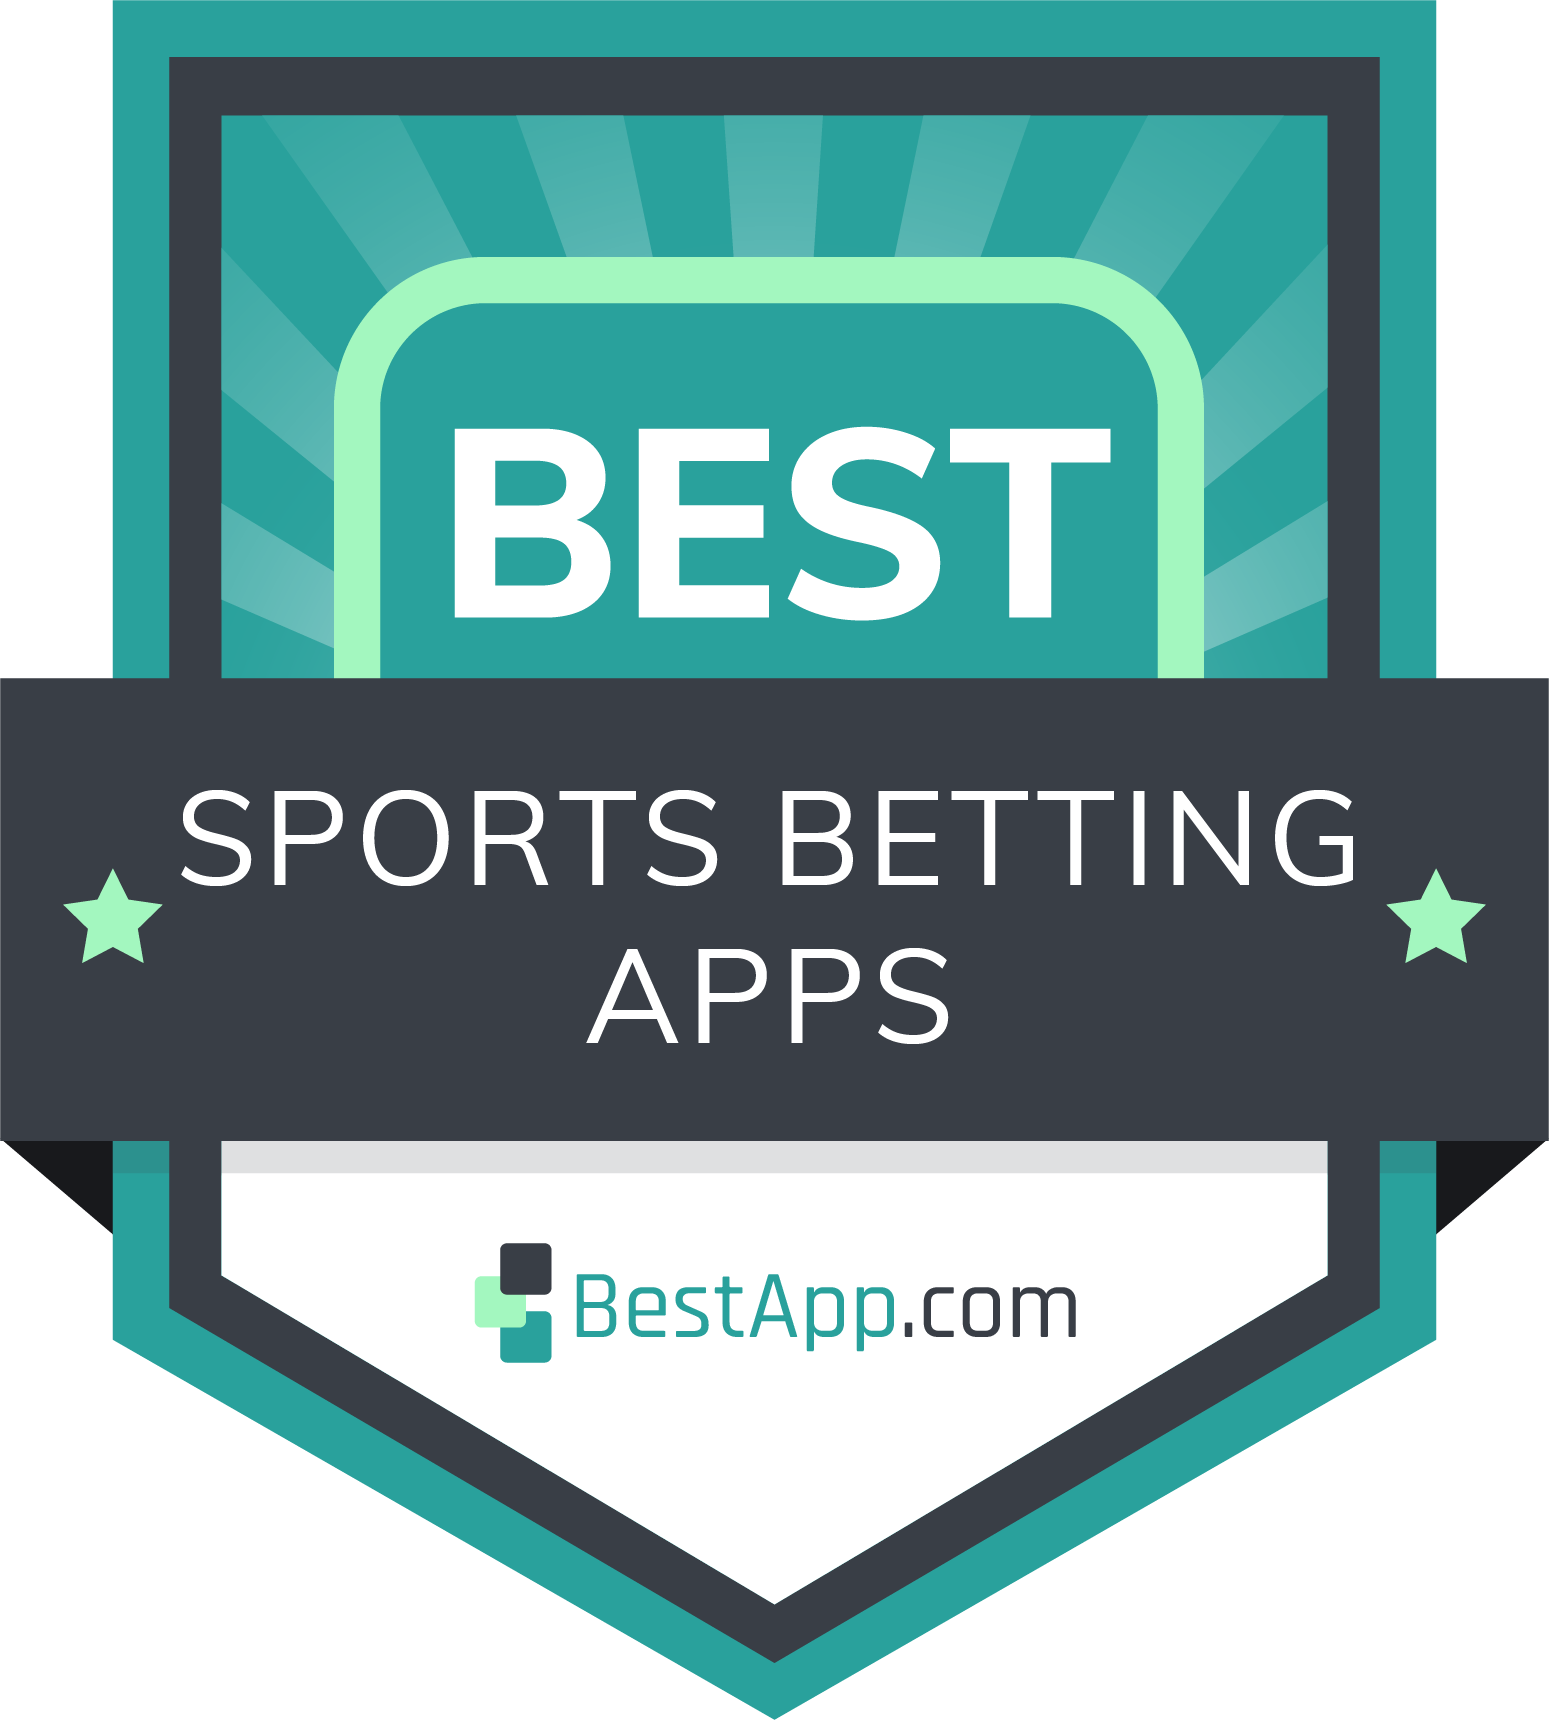 10 Creative Ways You Can Improve Your Betting App Cricket